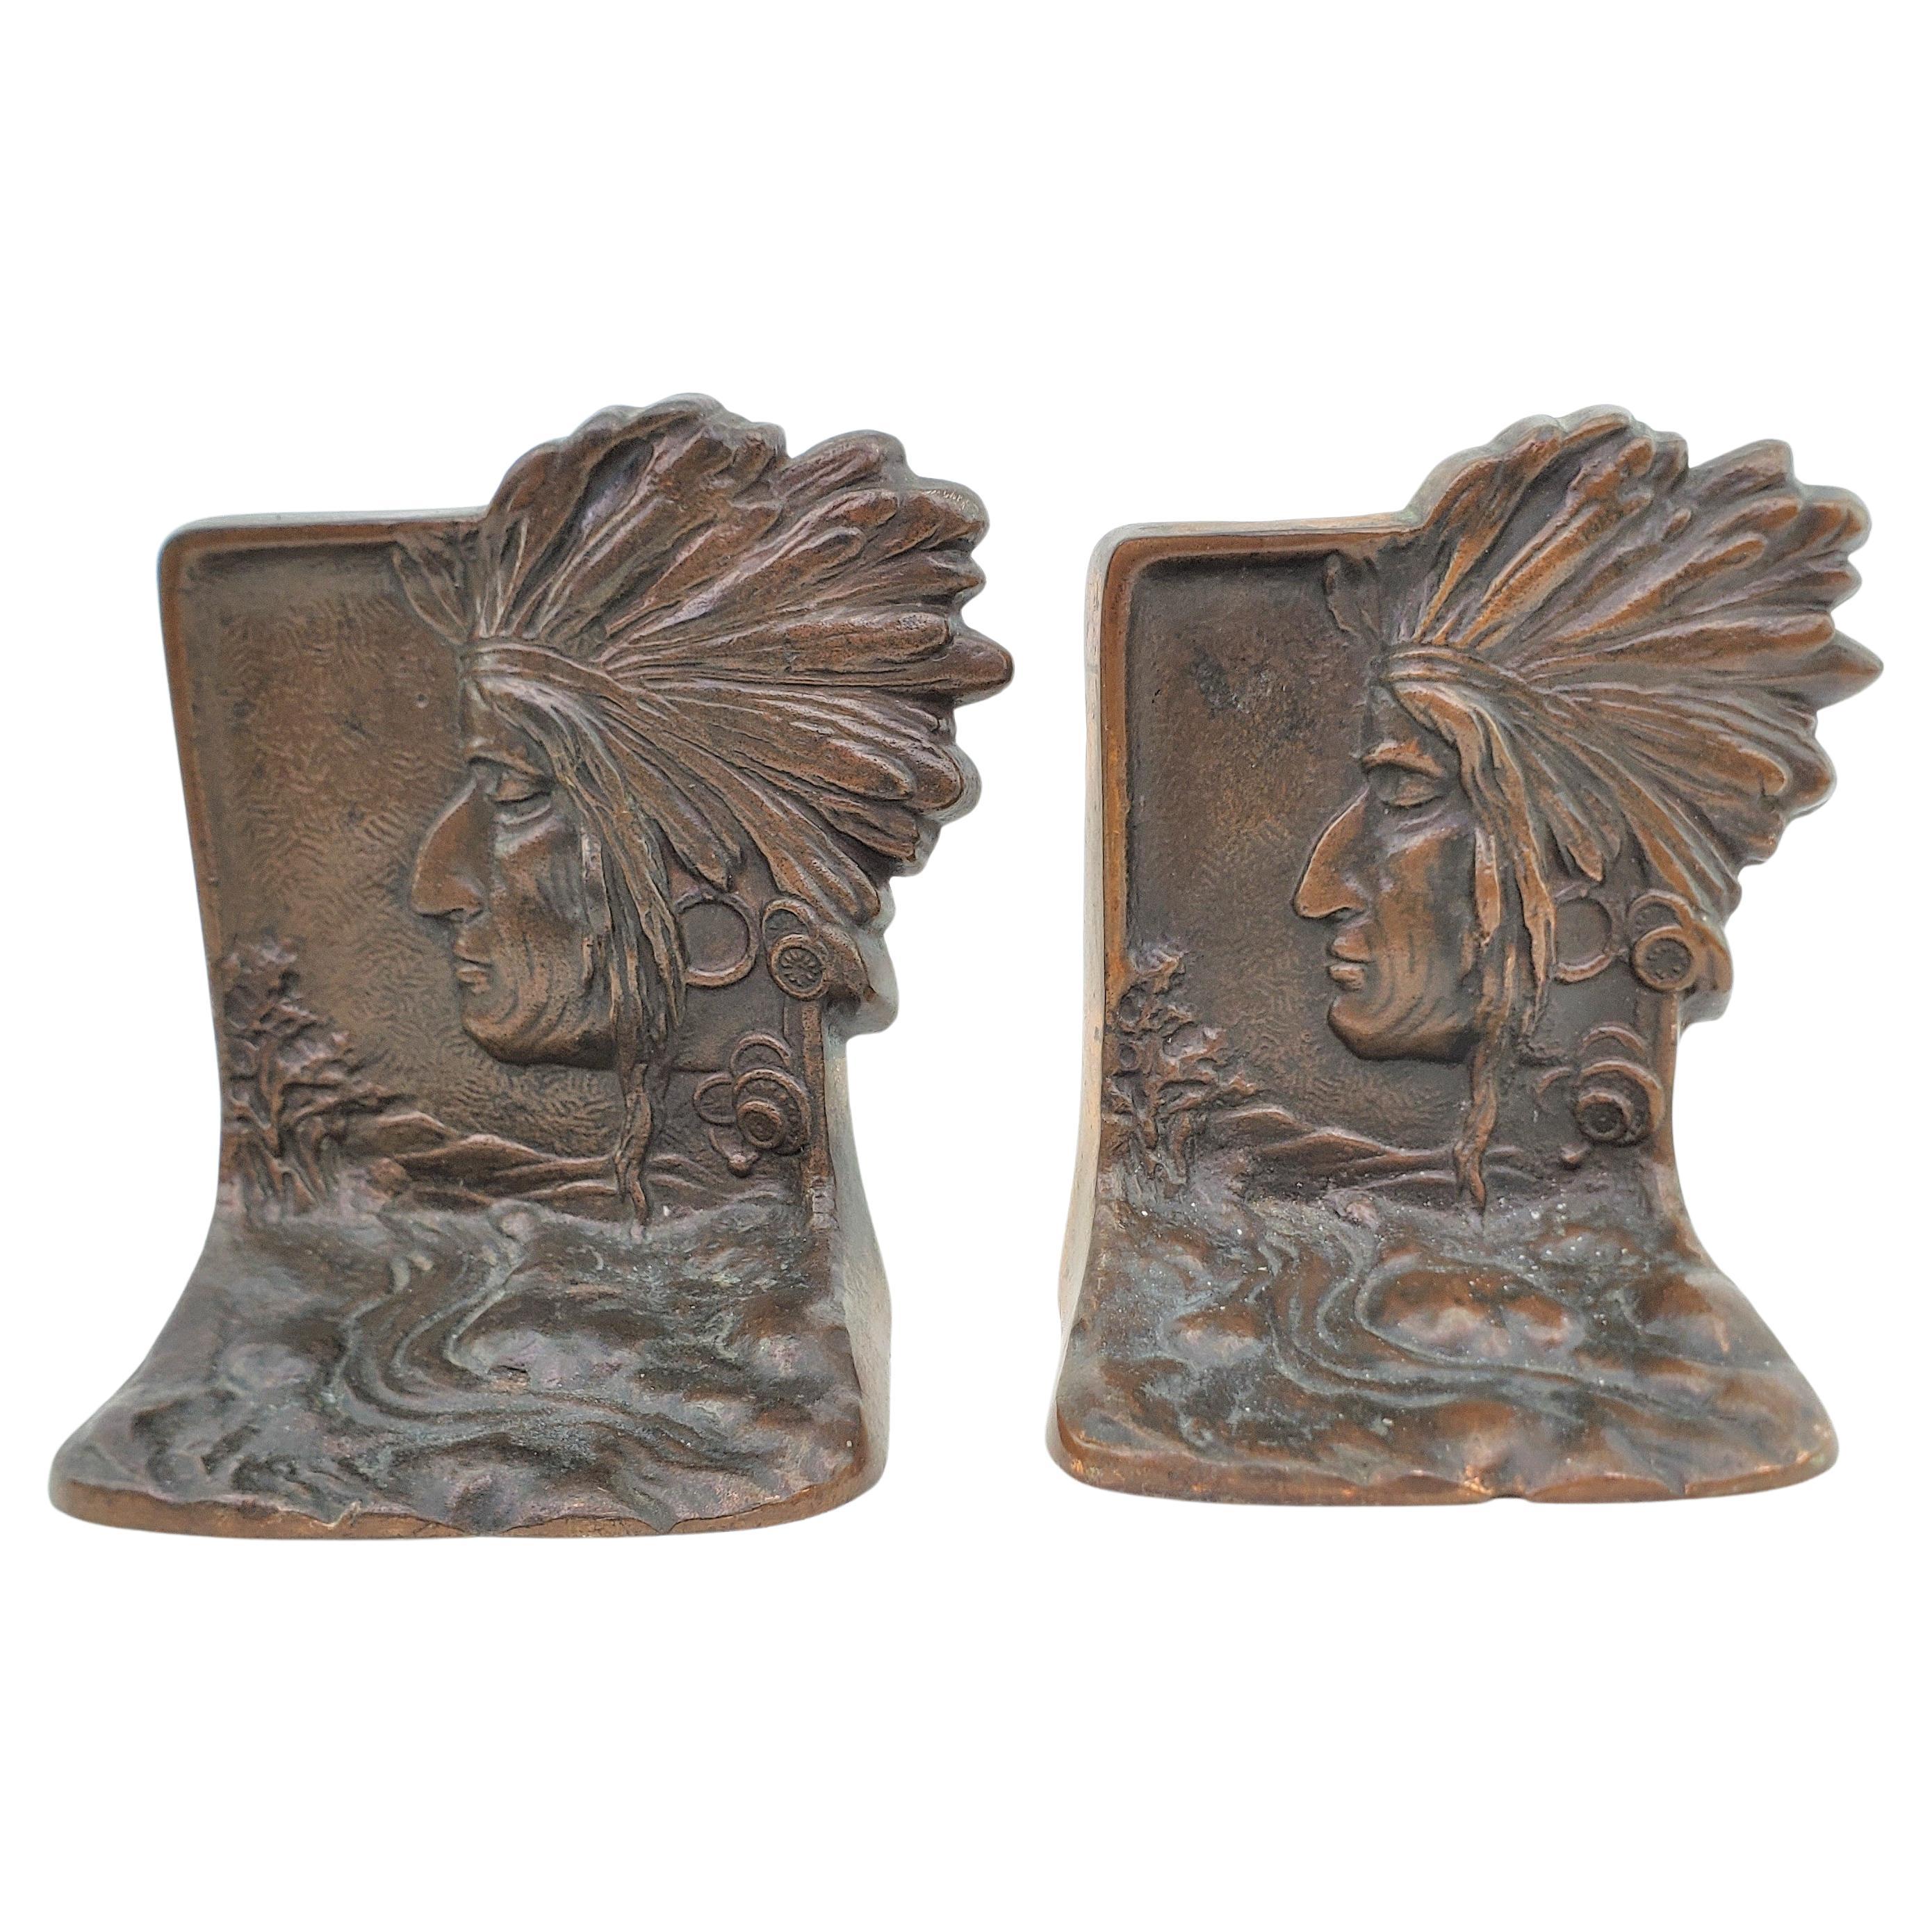 Antique Art Deco Cast & Patinated Bookends Depicting an Indigenous Warrior